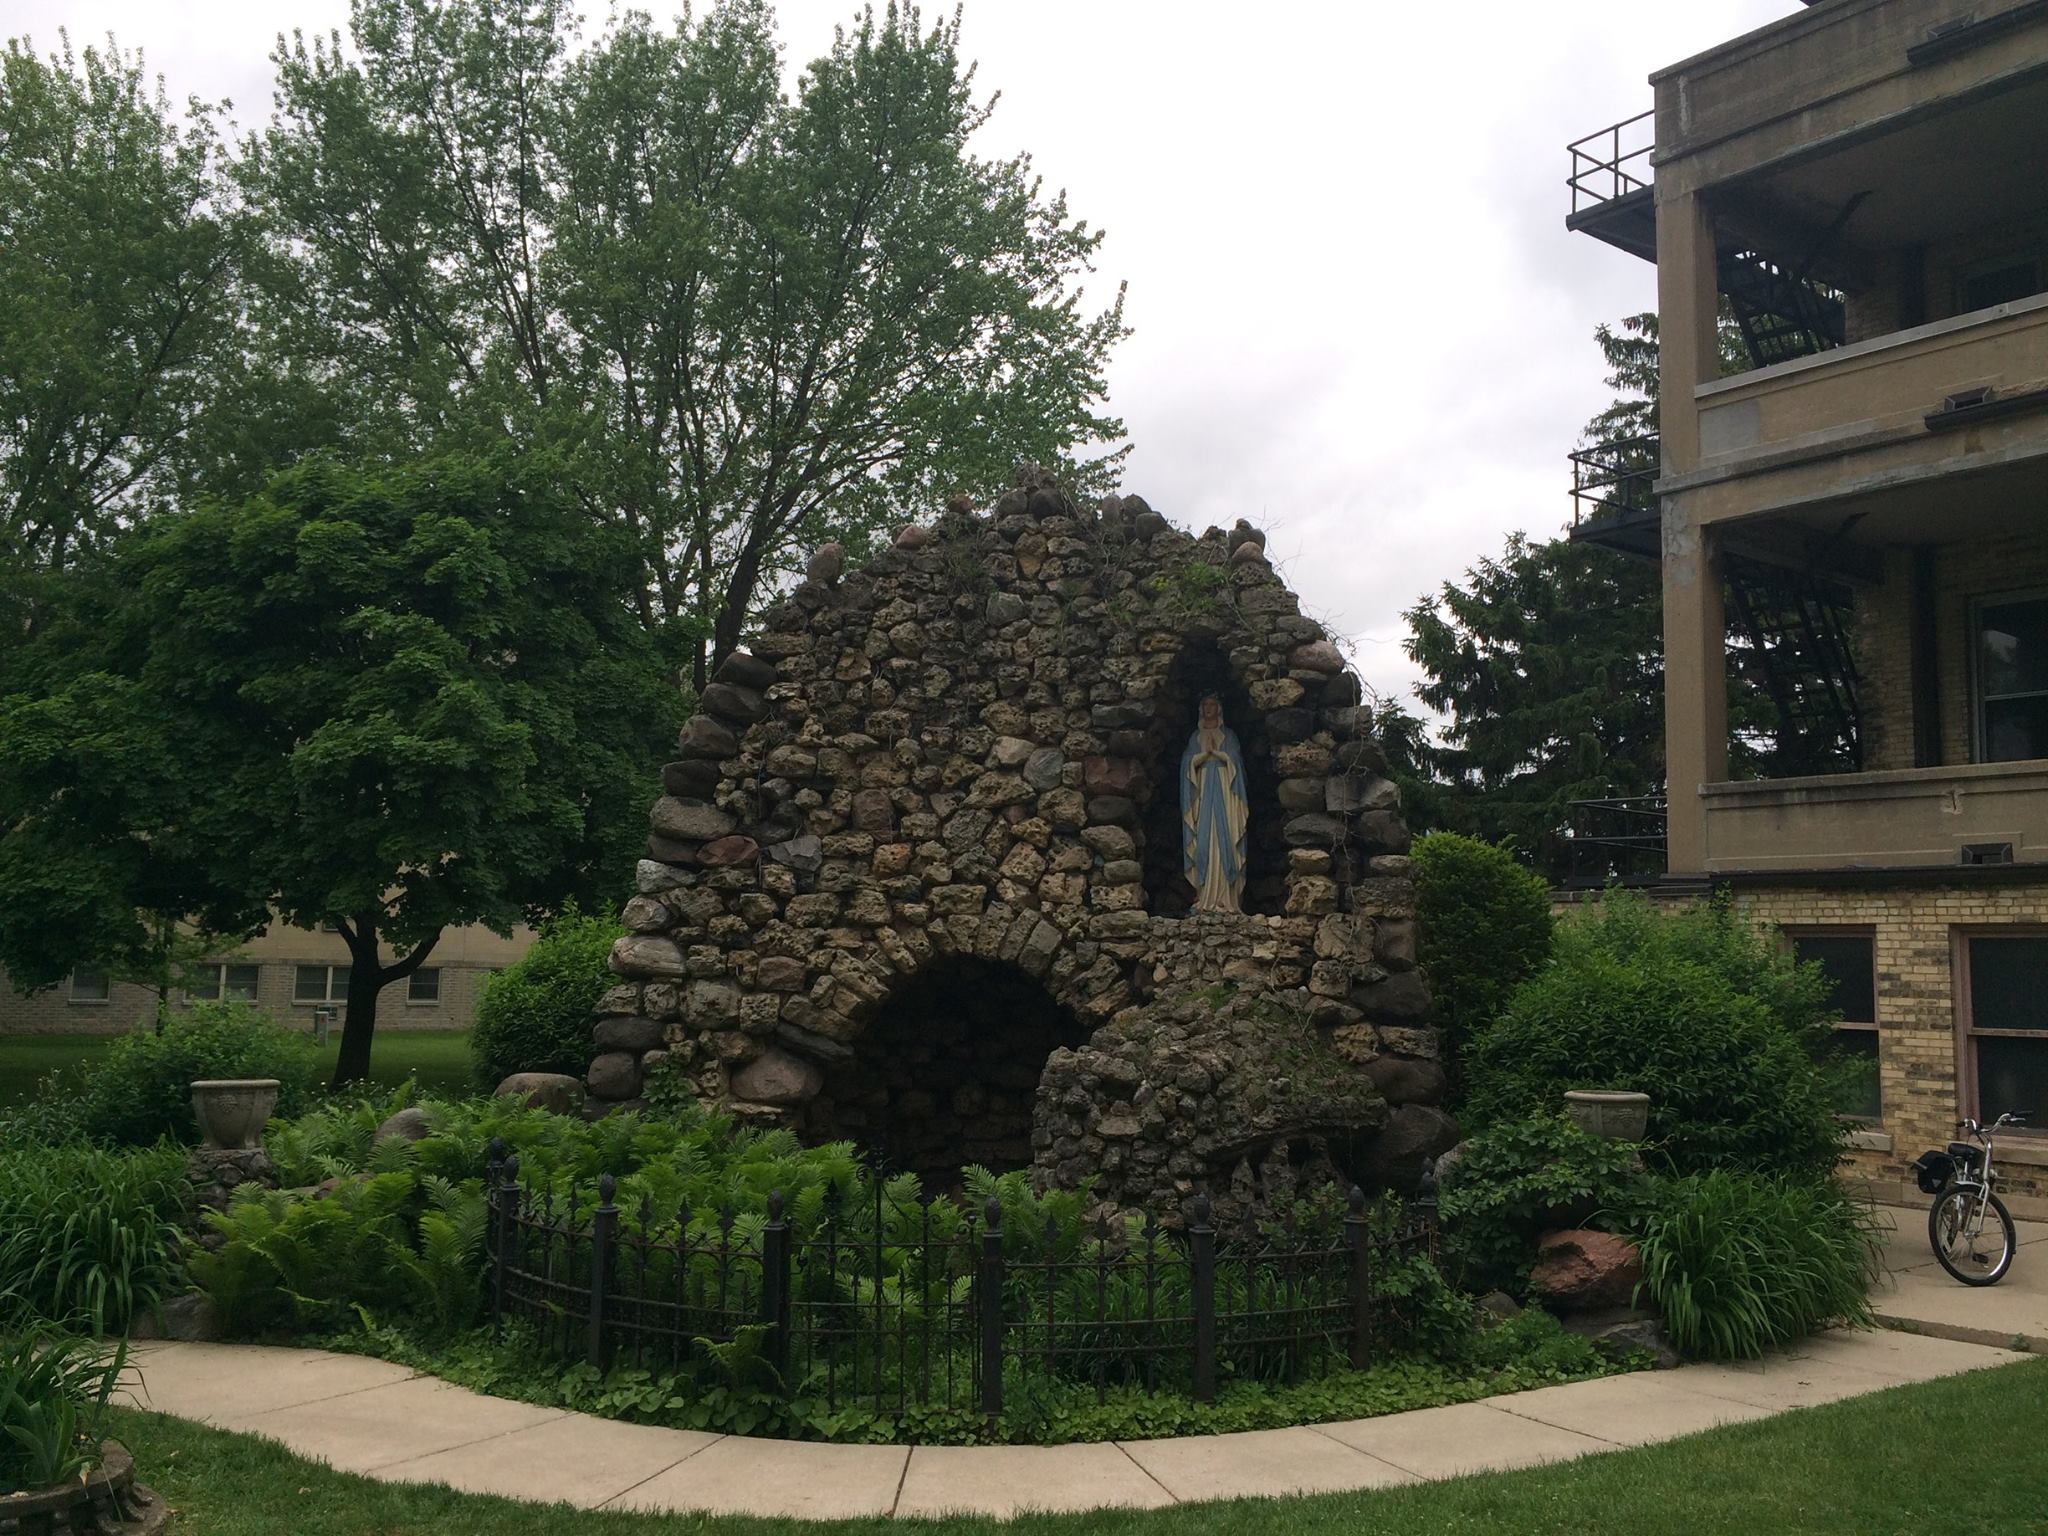 Milwaukee writers will remember the grotto at the Marian Center